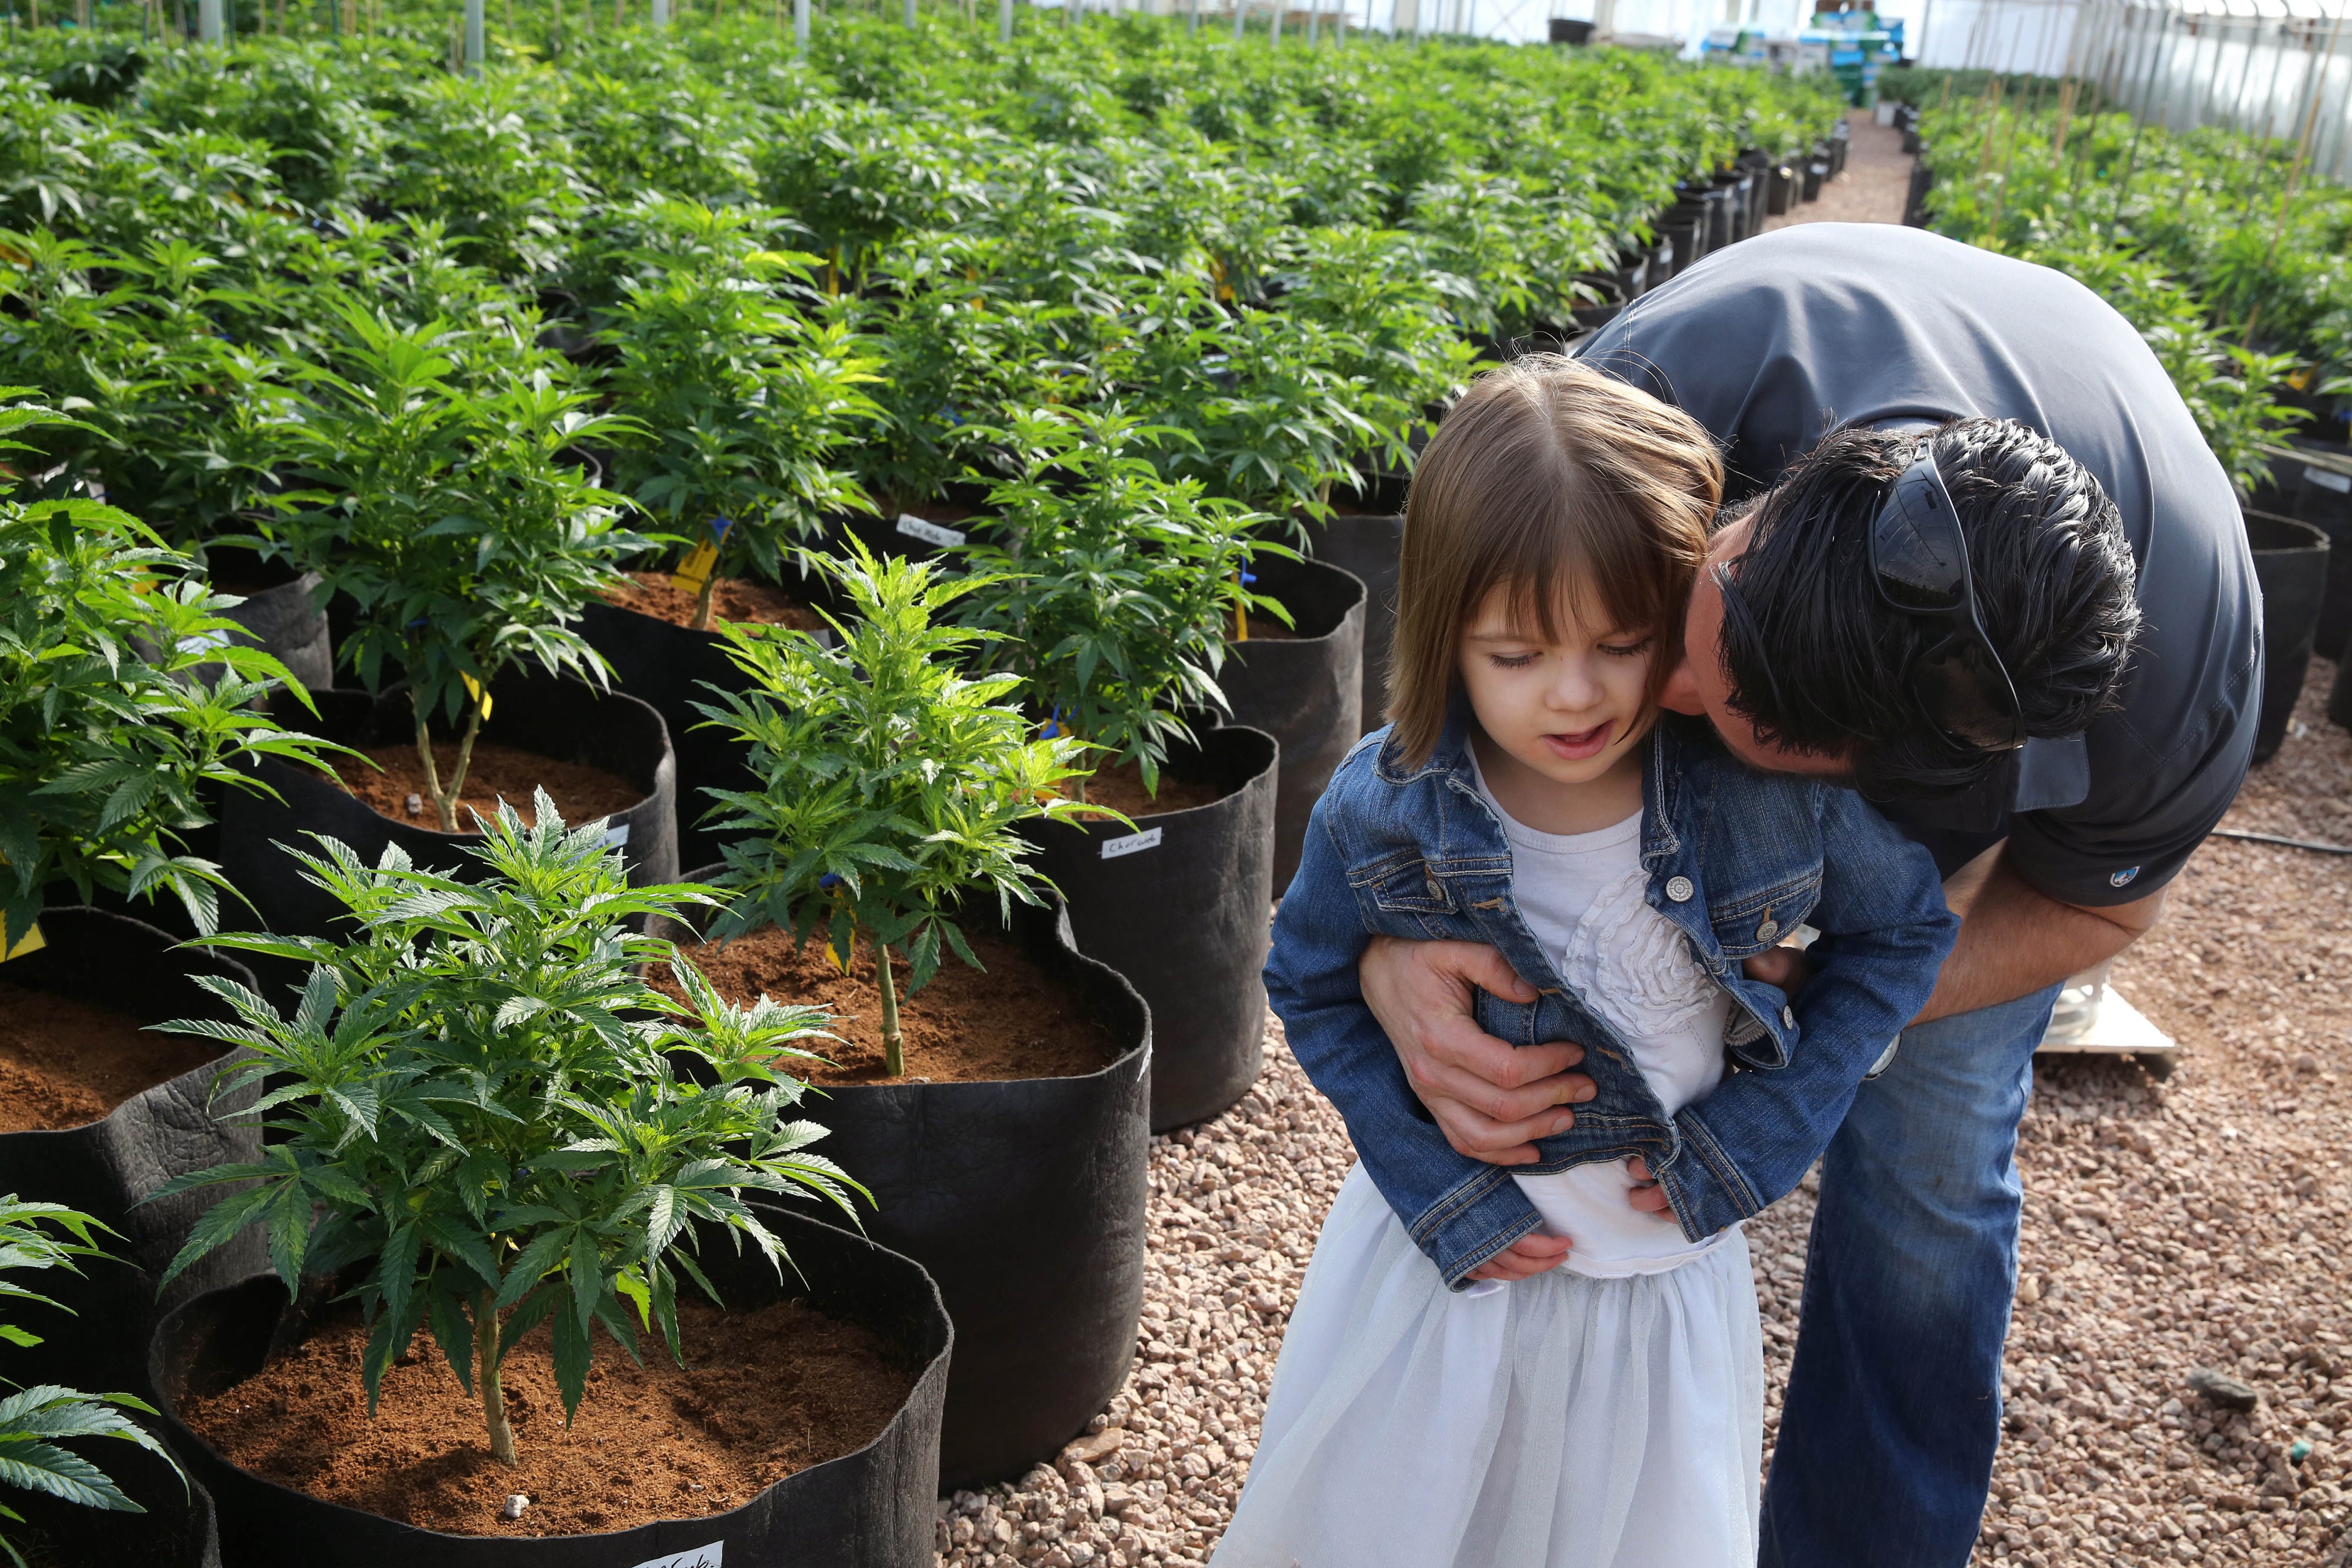 Matt Figi hugs his 7-year-old daughter Charlotte inside a Colorado greenhouse. The plants are a special strain of medical marijuana known as Charlotte's Web, which was named for Charlotte after she used the plant to treat epileptic seizures (Brennan Linsley—AP)